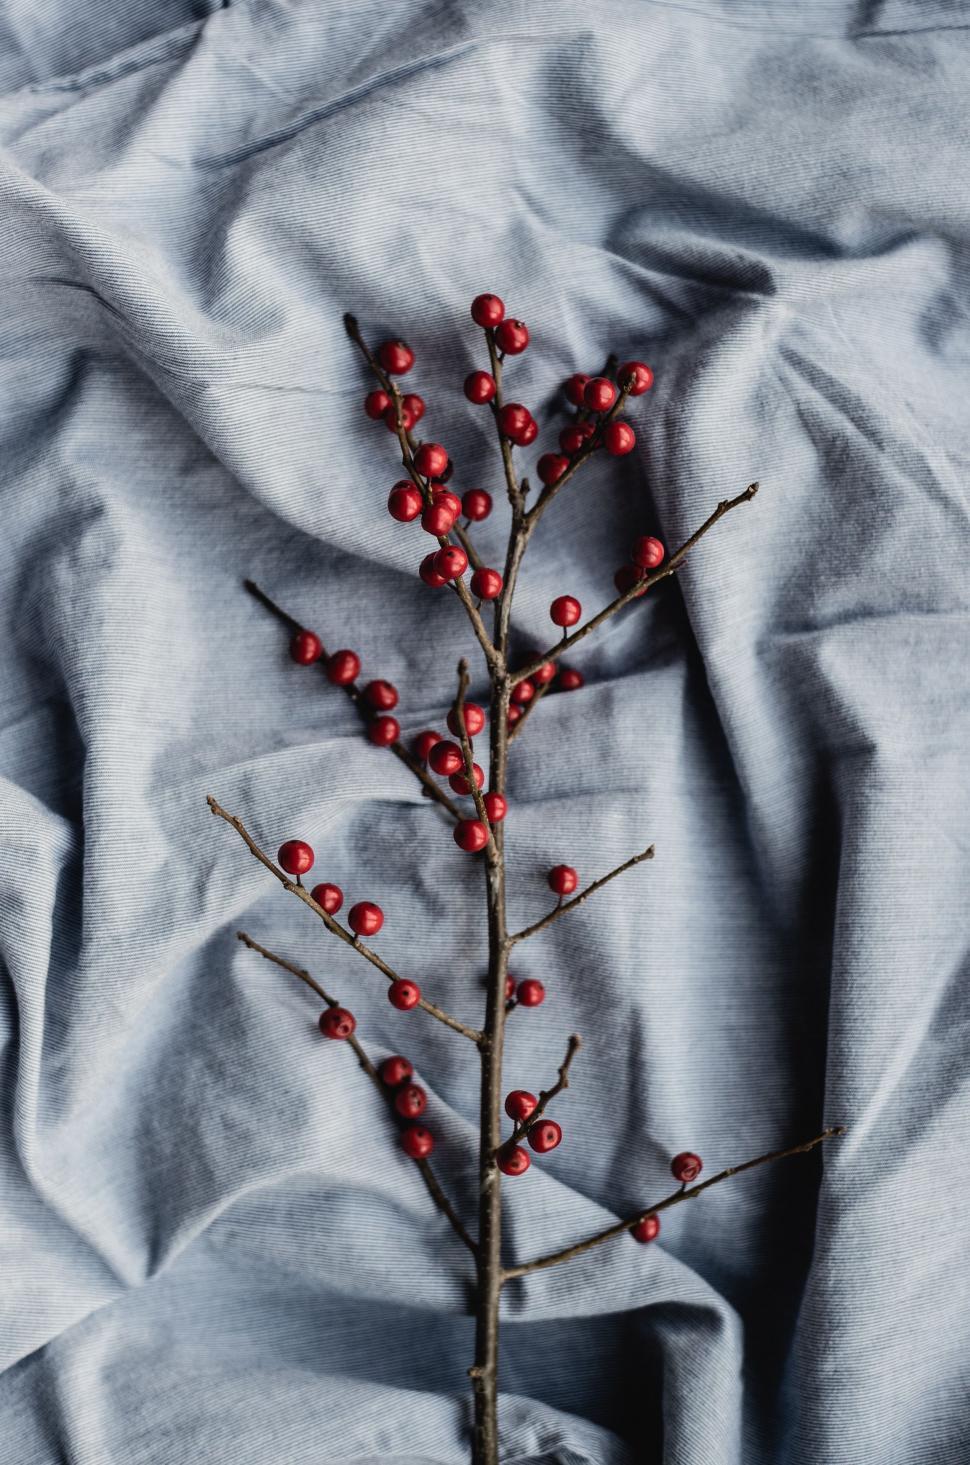 Free Image of Branch With Red Berries on Gray Cloth 